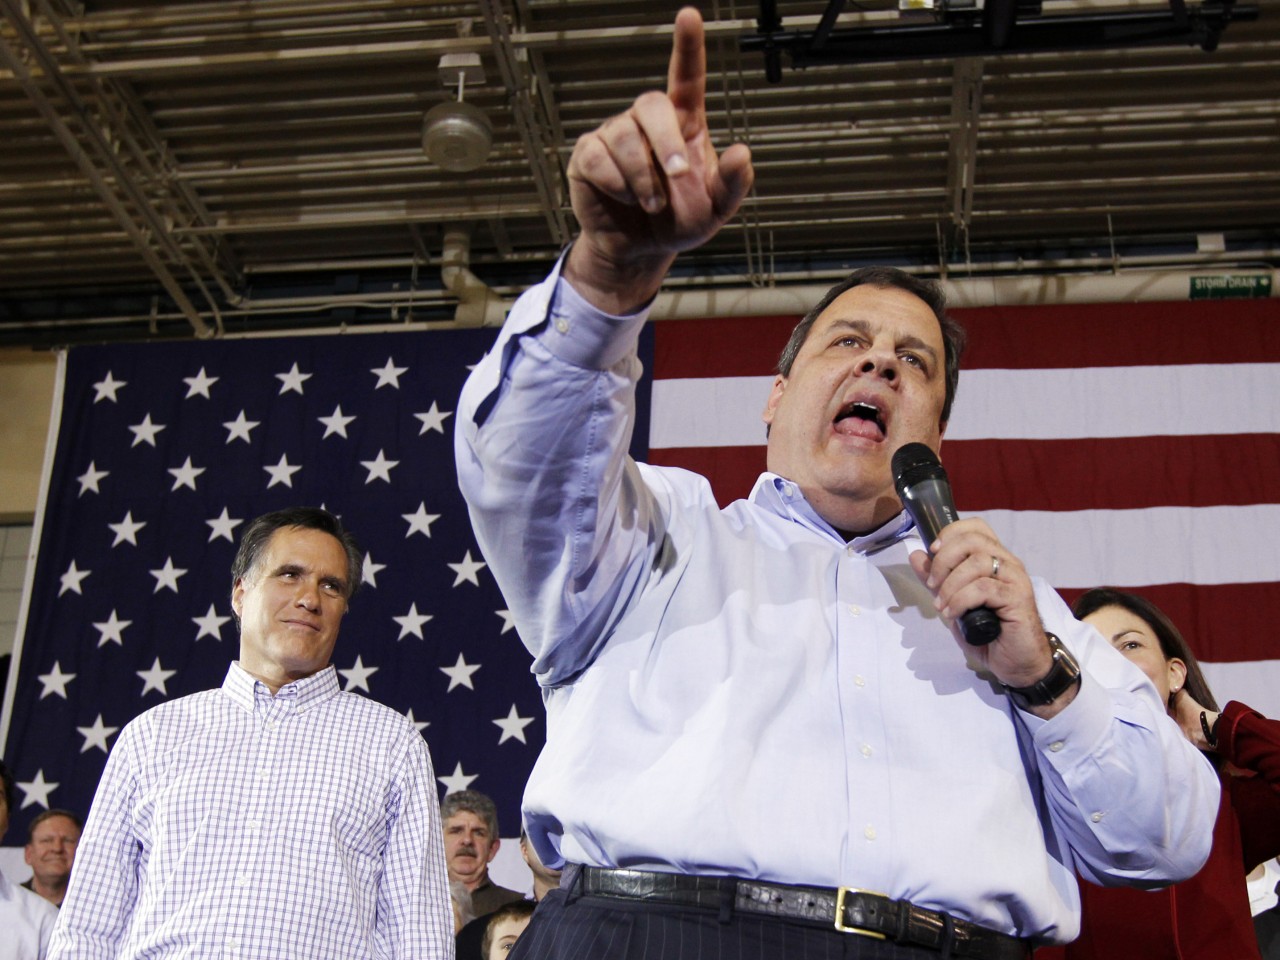 NJ Gov Christie Rearranged Schedule to Appear with Mitt Romney